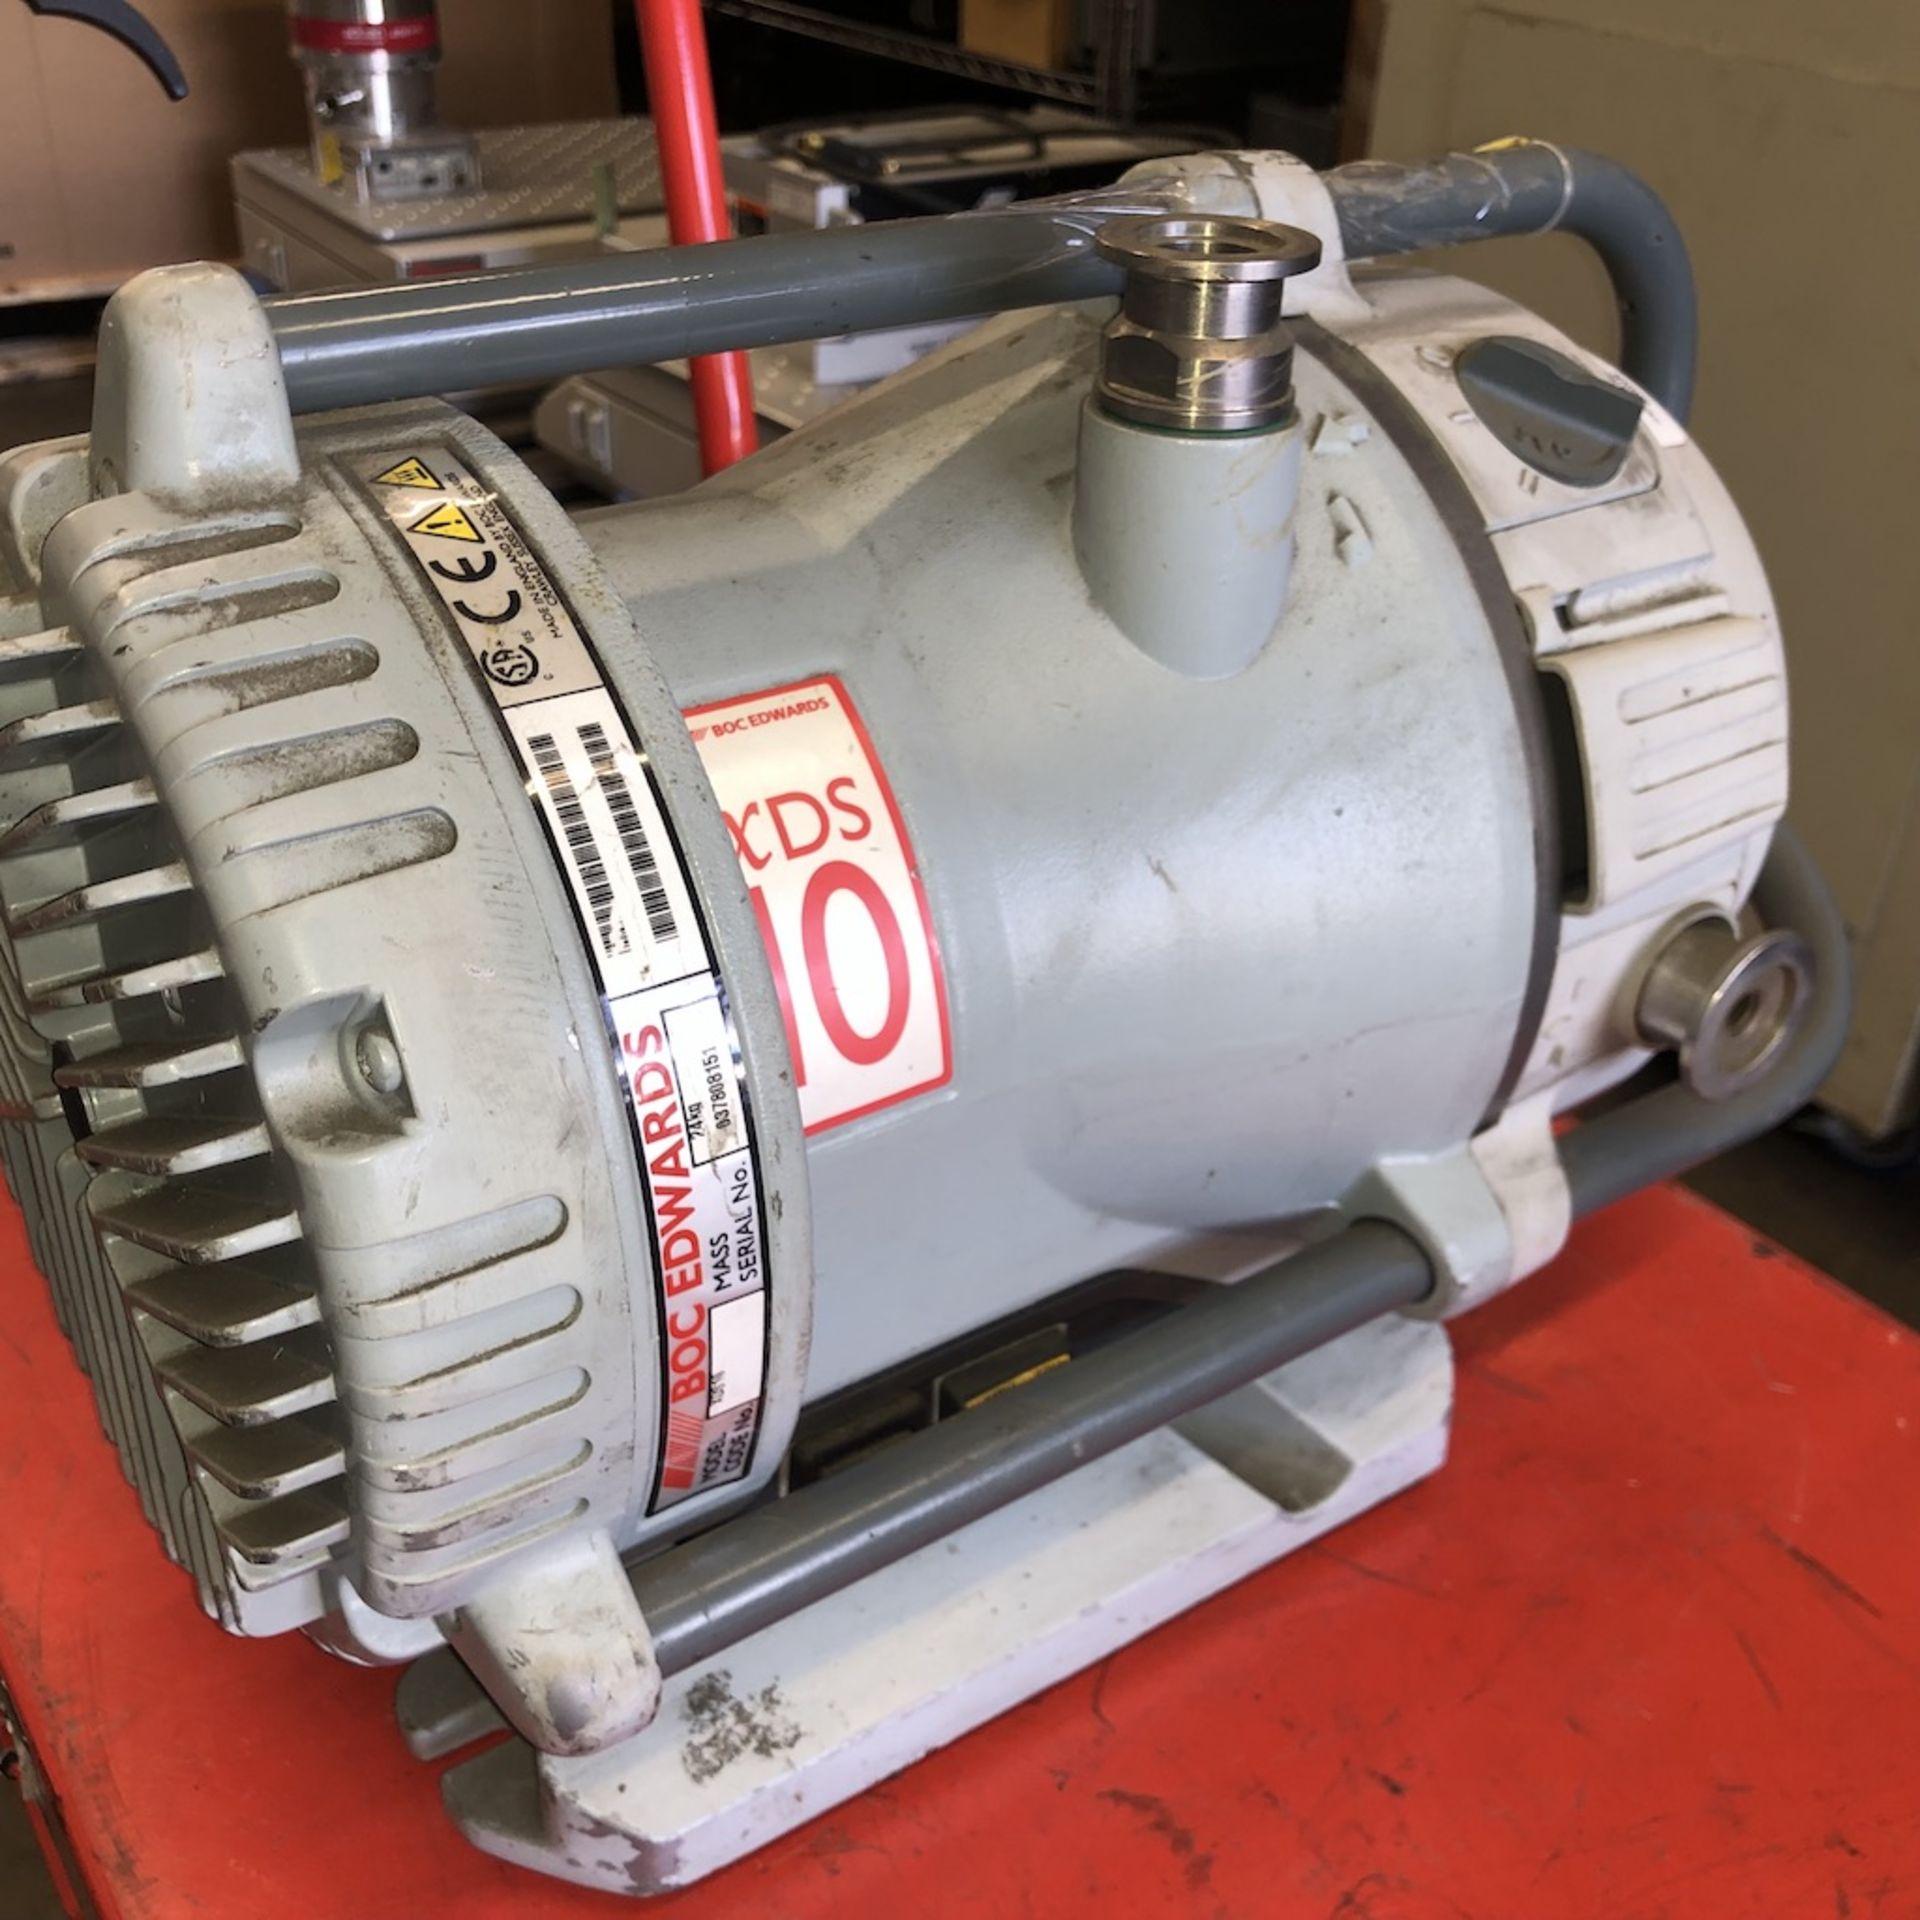 EDWARDS XDS10 DRY SCROLL PUMP - Image 5 of 7